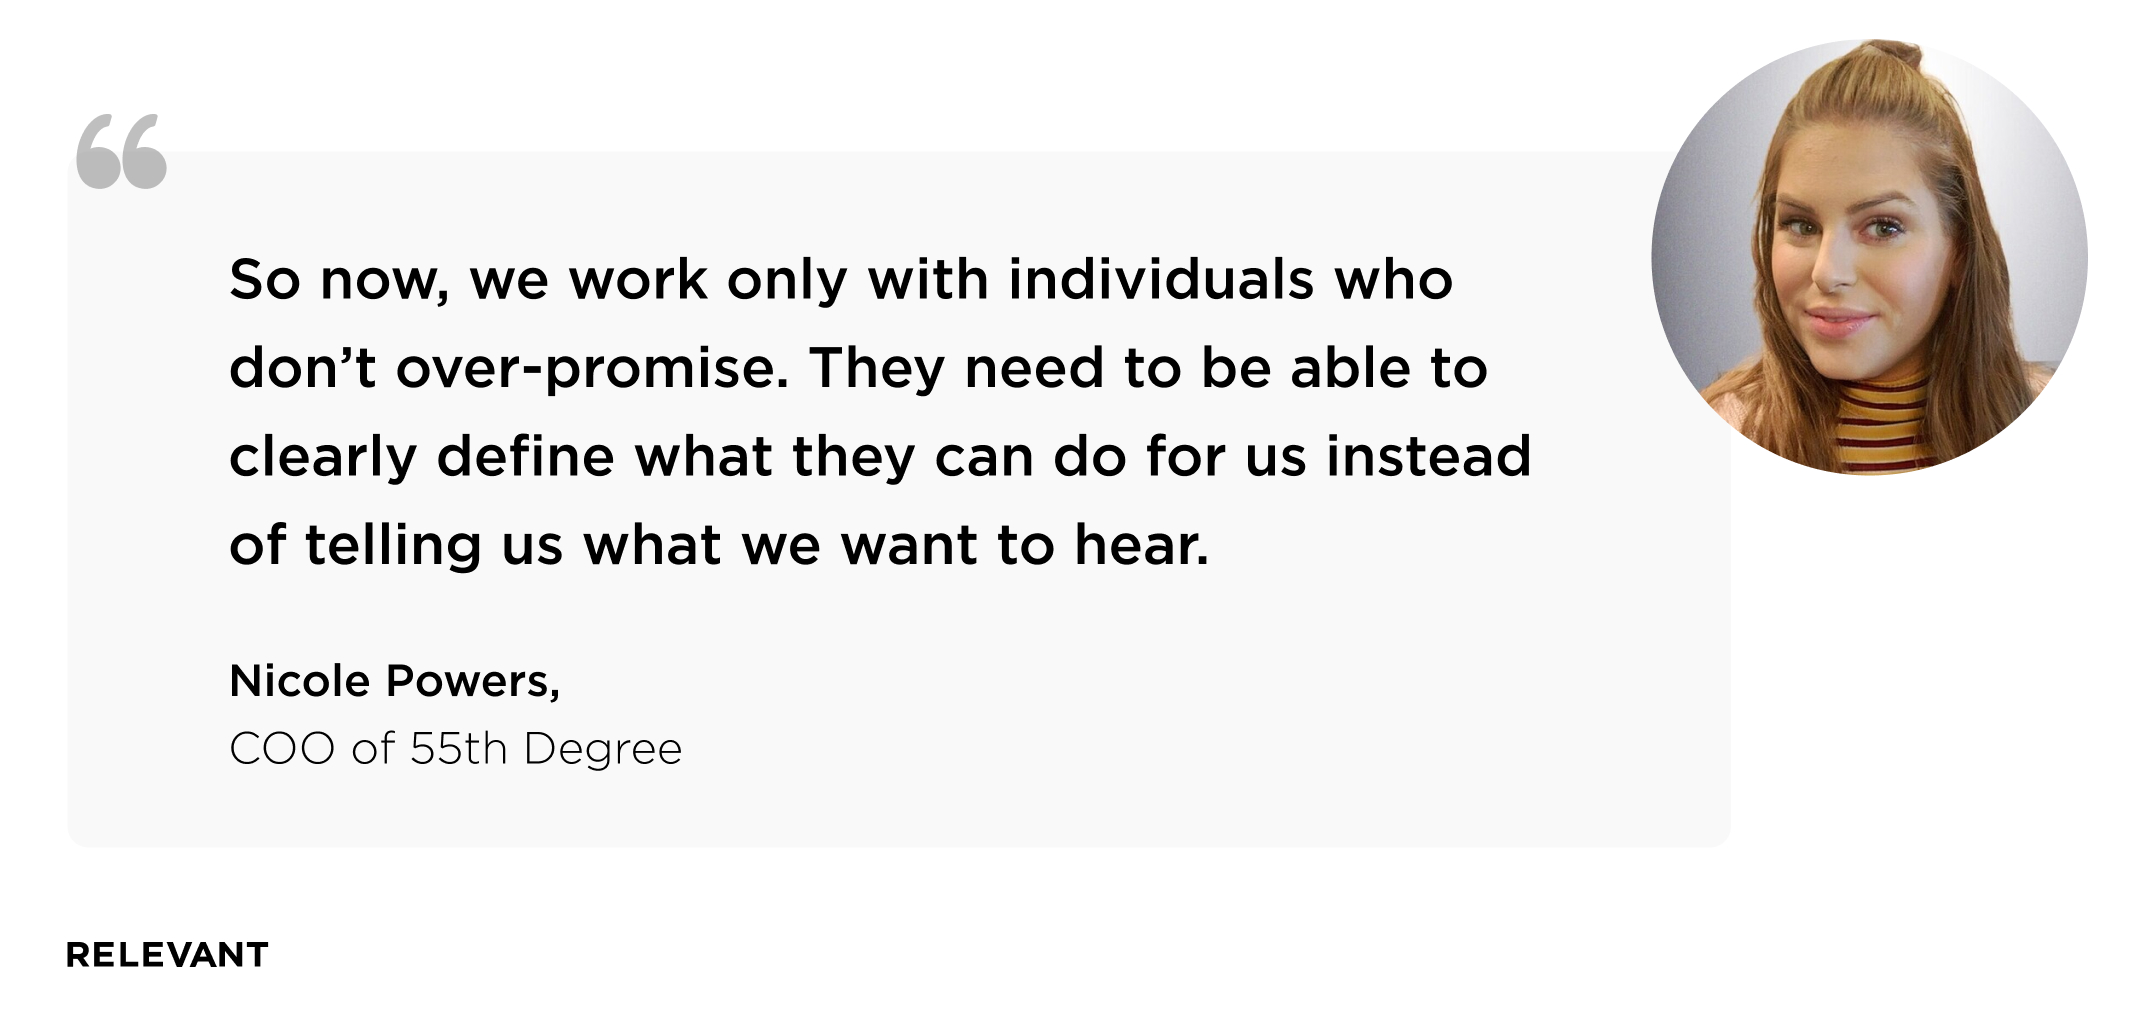 So now, we work only with individuals who don’t over-promise. They need to be able to clearly define what they can do for us instead of telling us what we want to hear. Nicole Powers, COO of 55th Degree